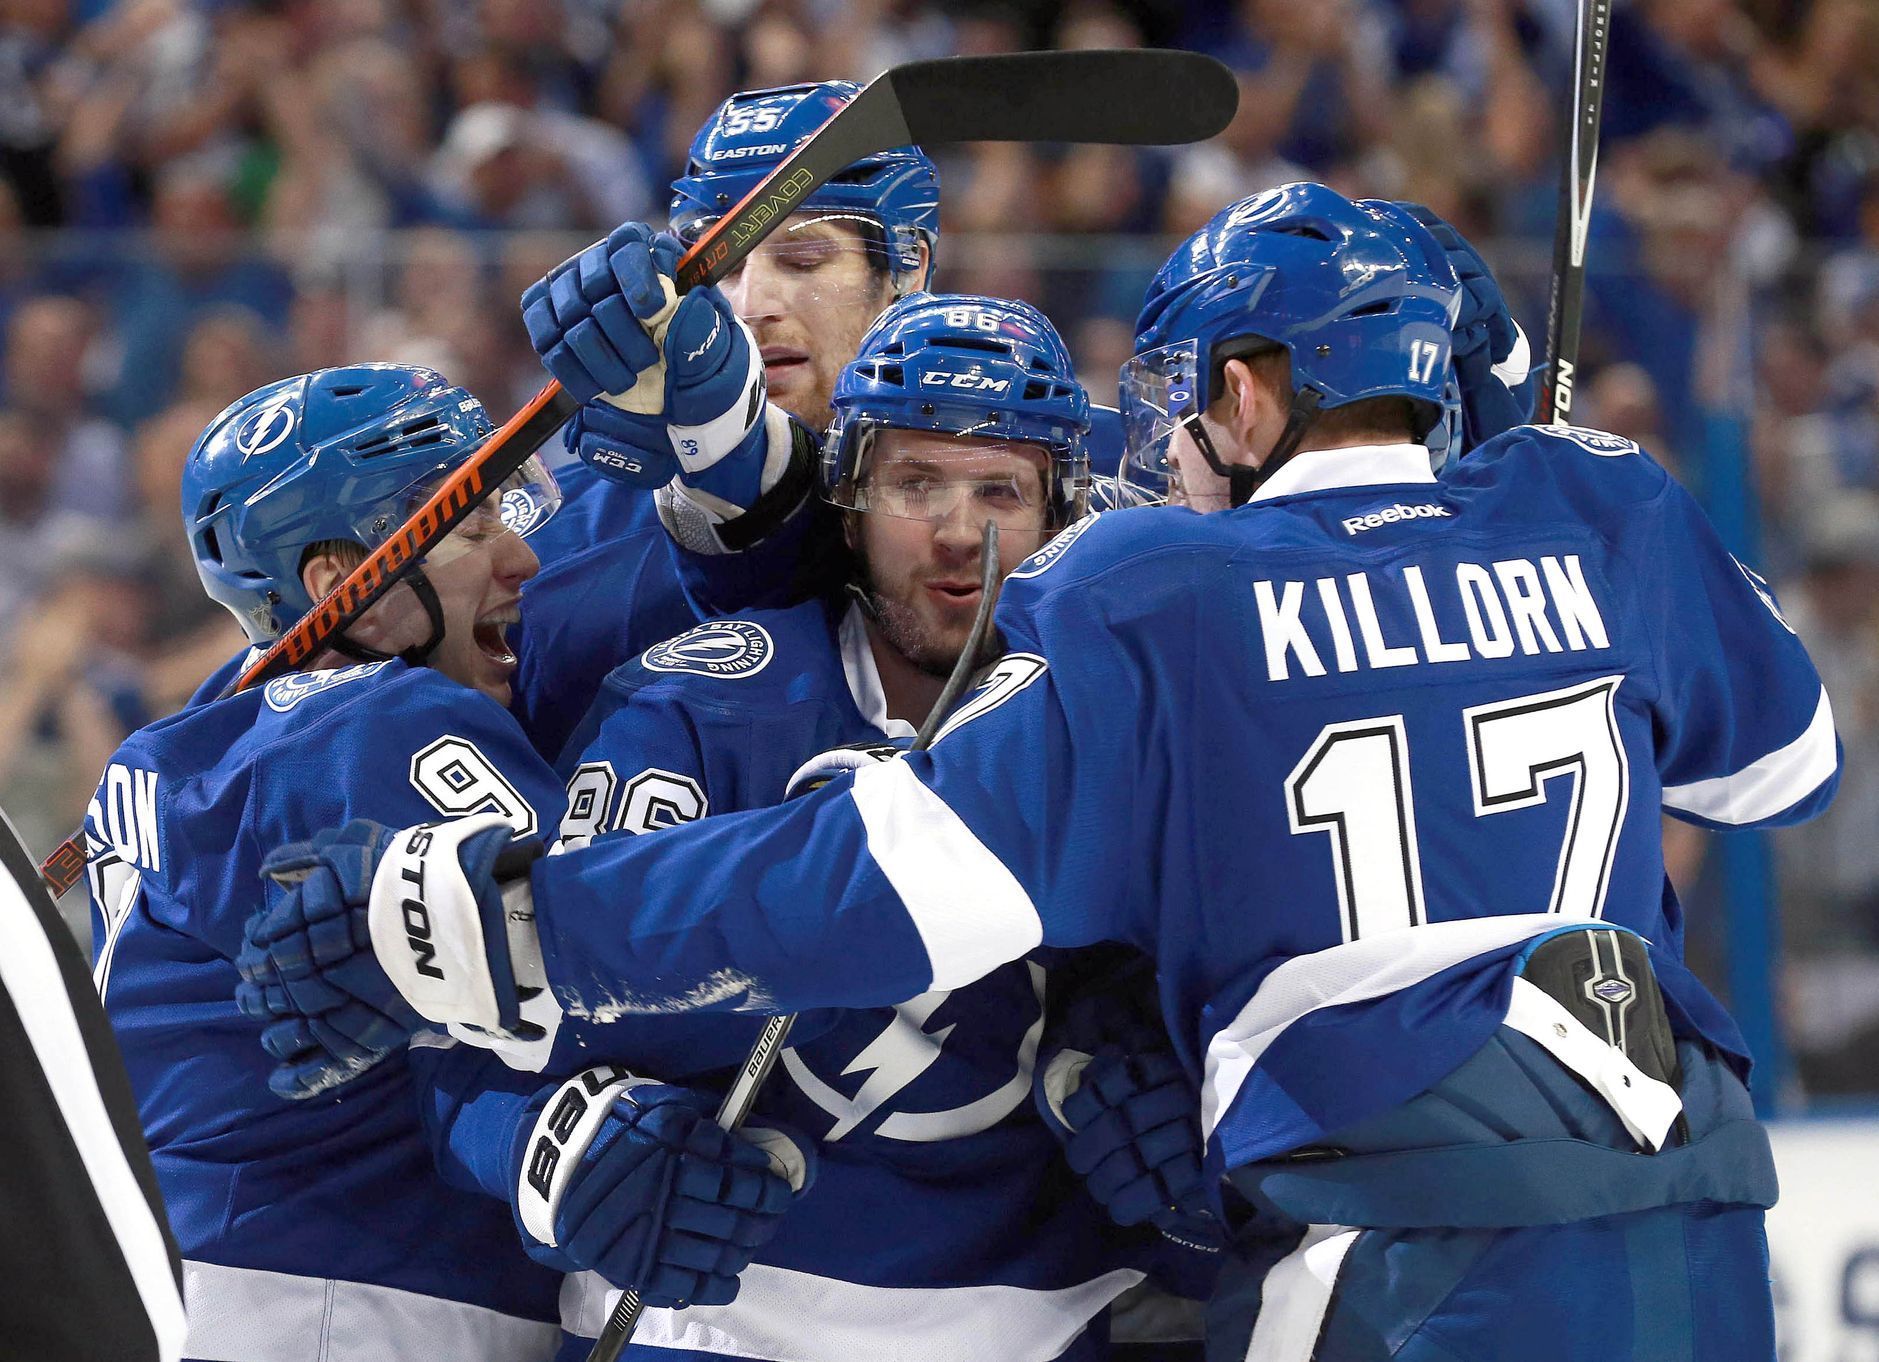 NHL Play-off: Tampa Bay Lightning vs. Detroit Red Wings 1. zápas